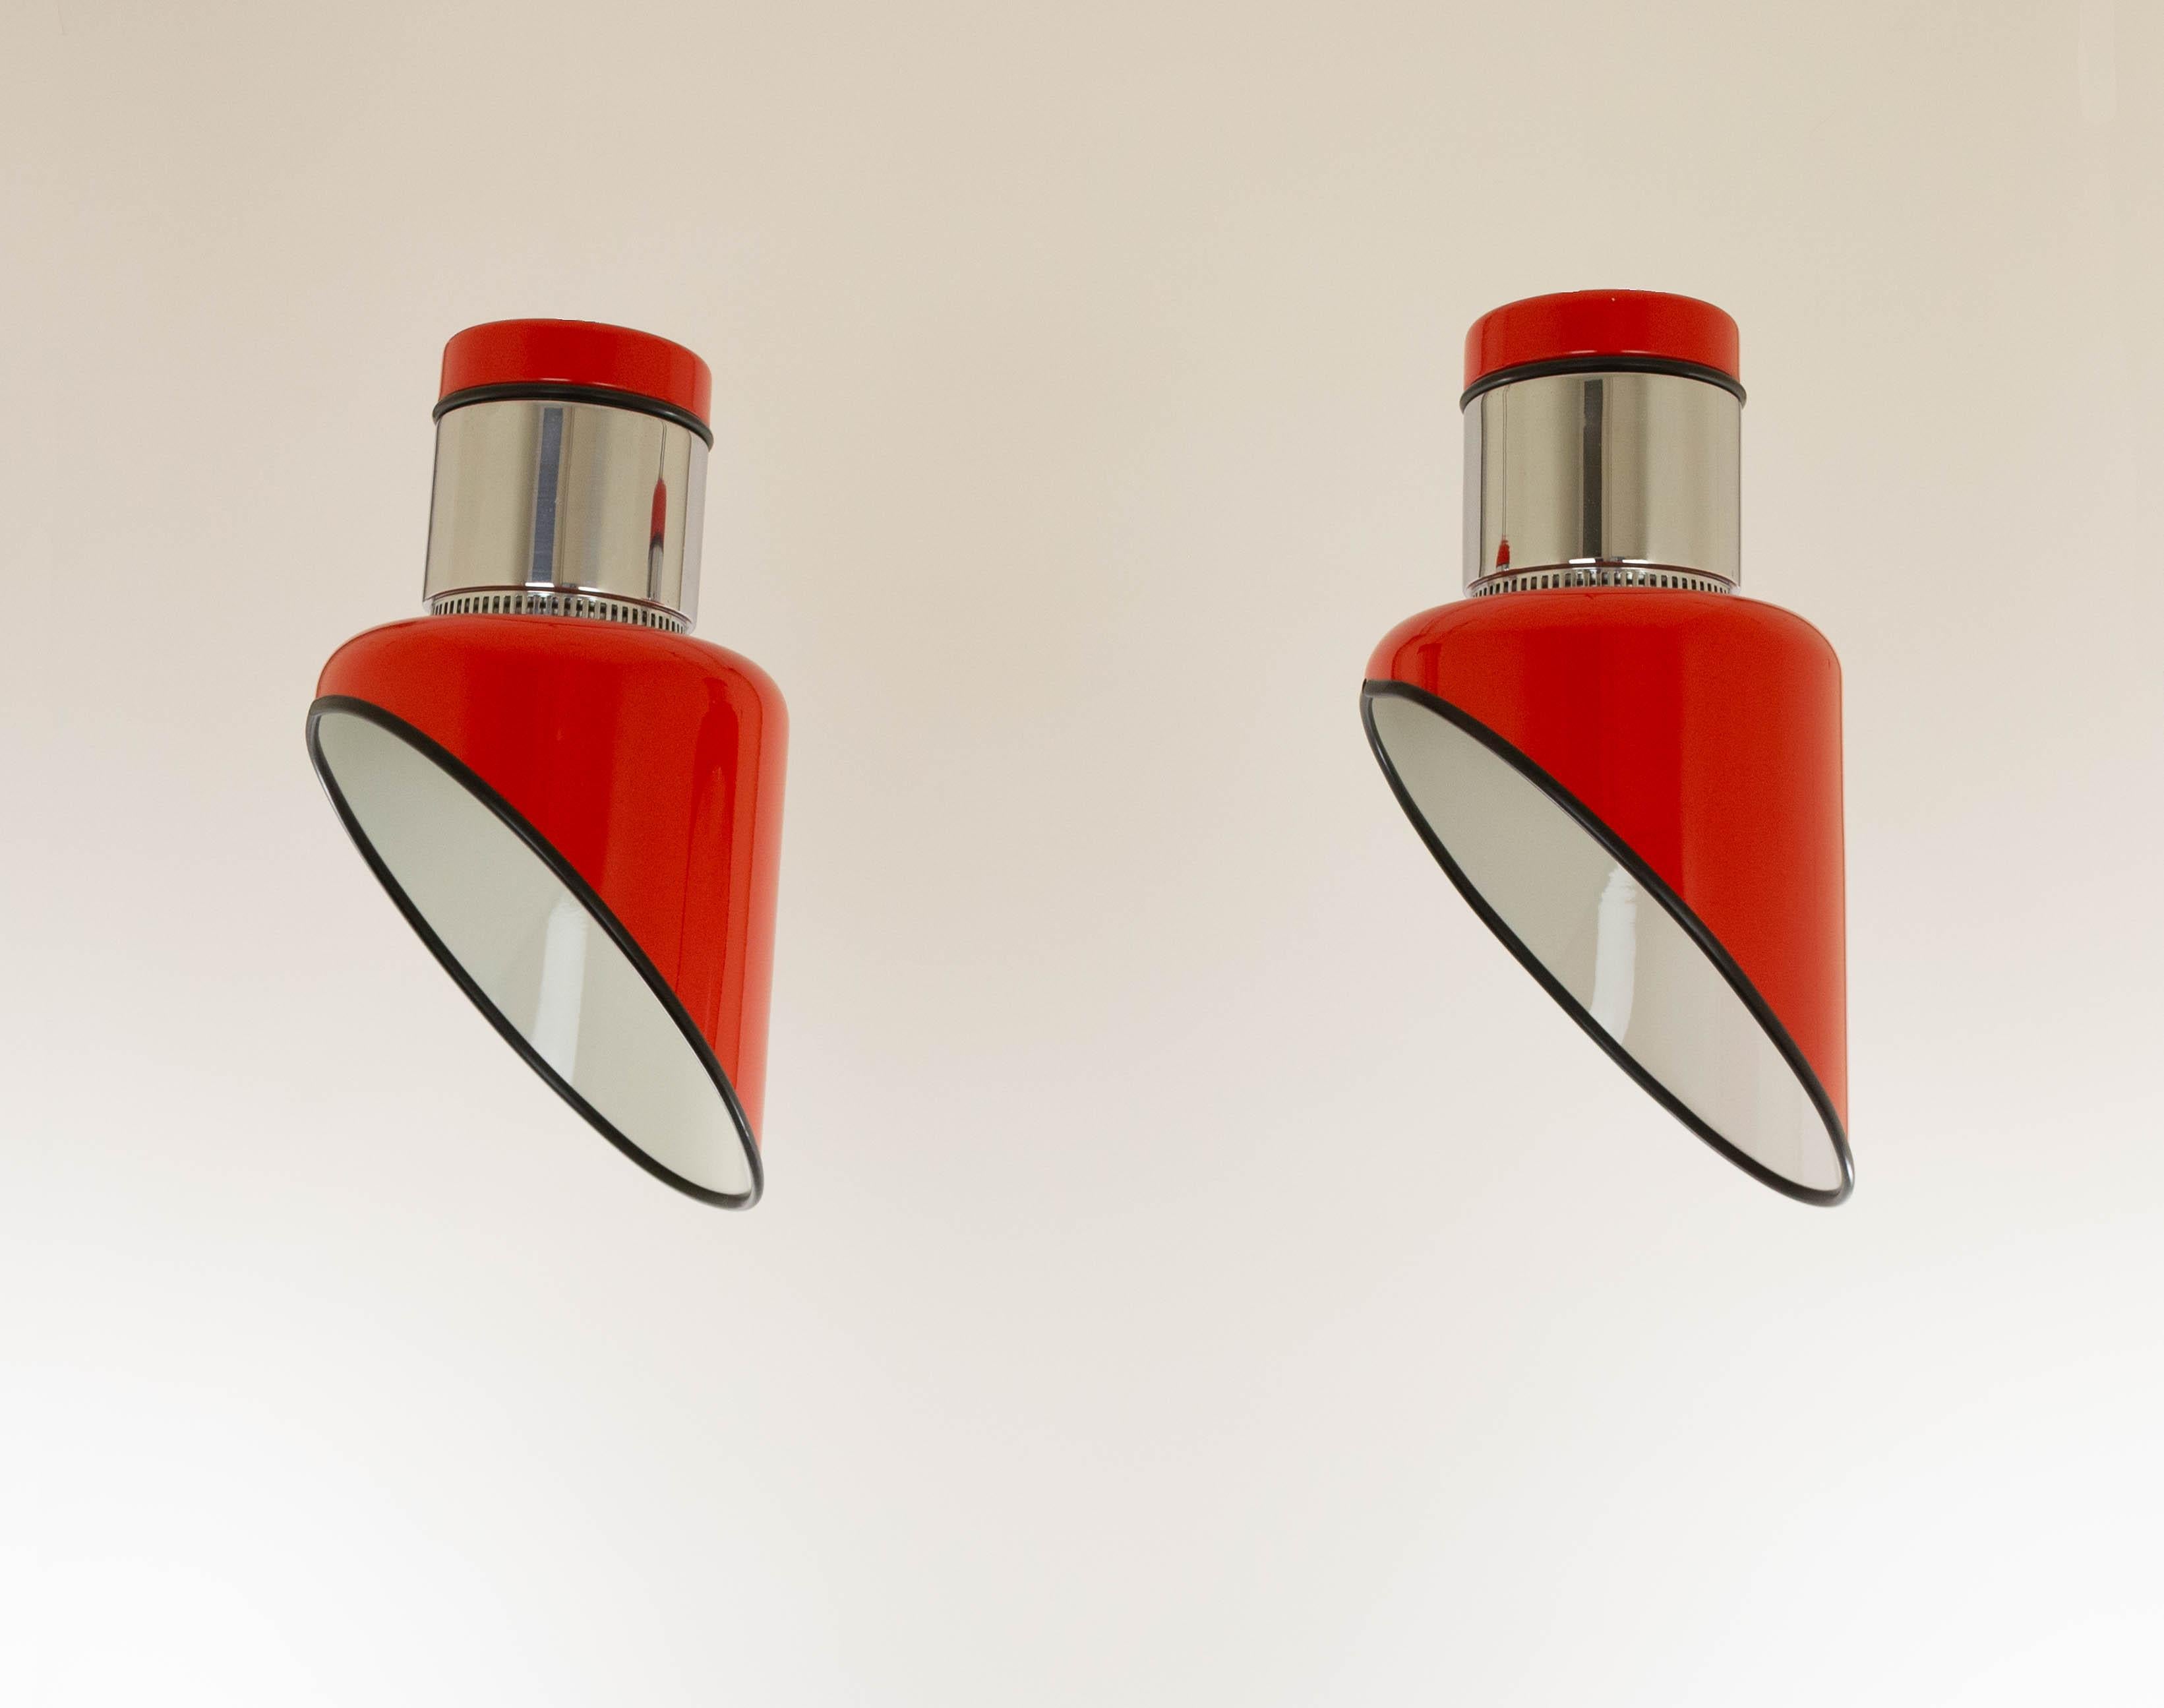 Lacquered Pair of Sisten Ceiling Lamps by Gianni Celada for Fontana Arte, 1970s For Sale